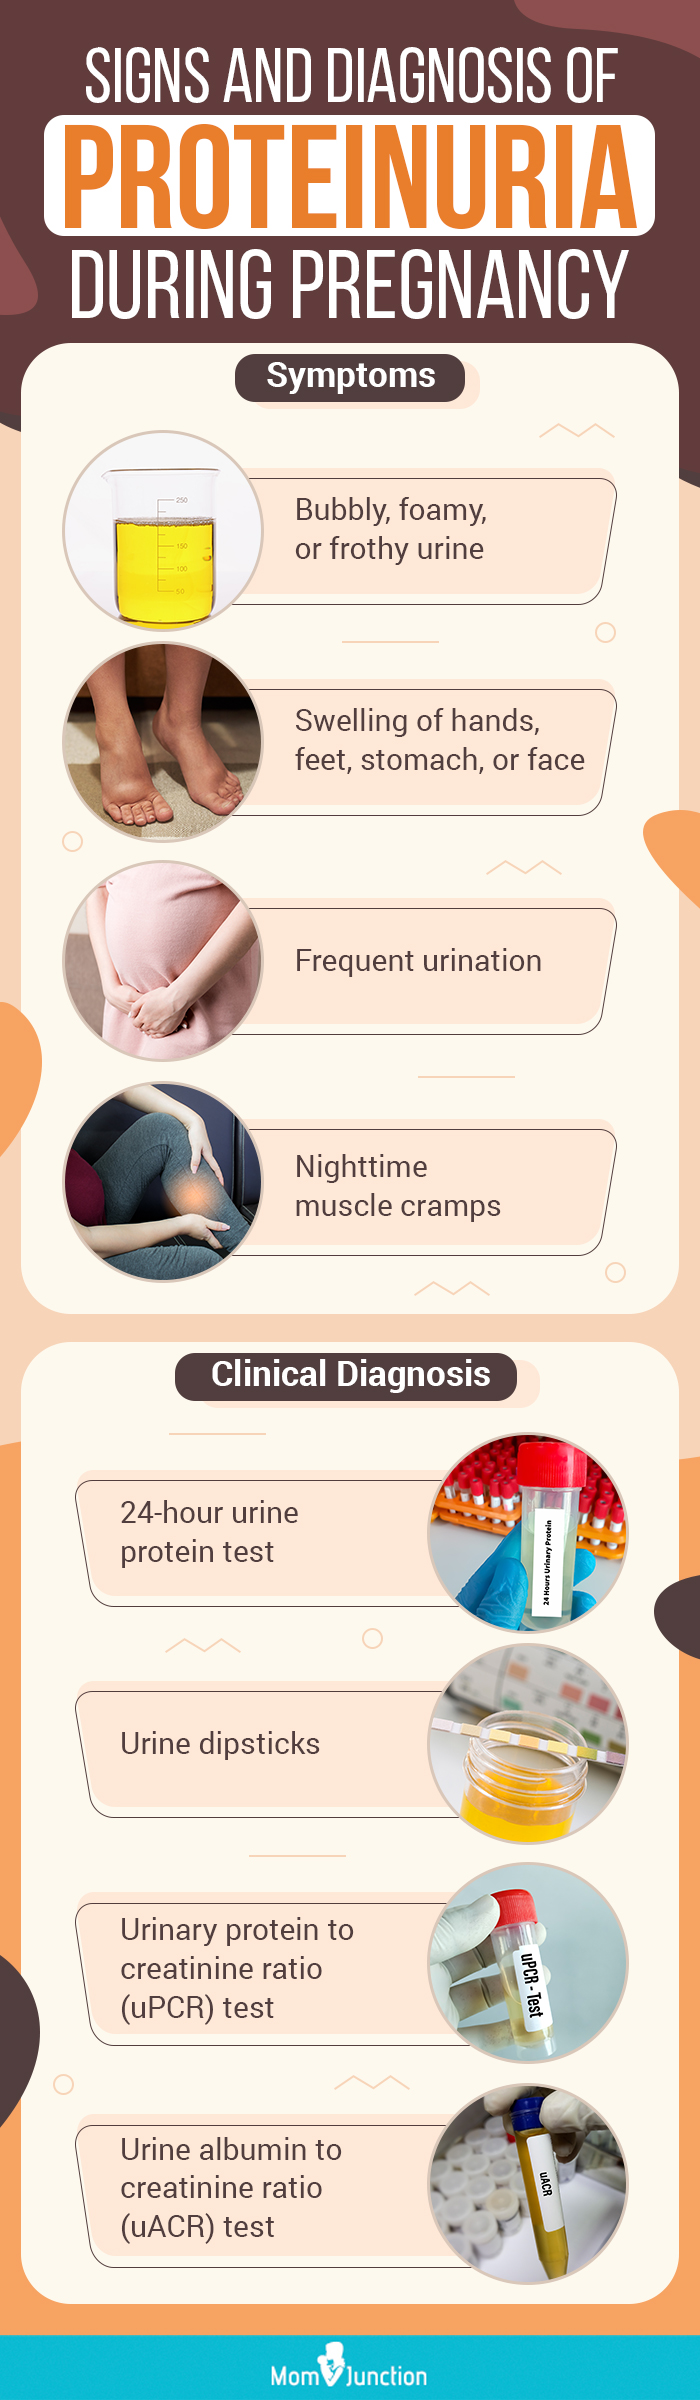 Signs And Diagnosis Of Proteinuria During Pregnancy 